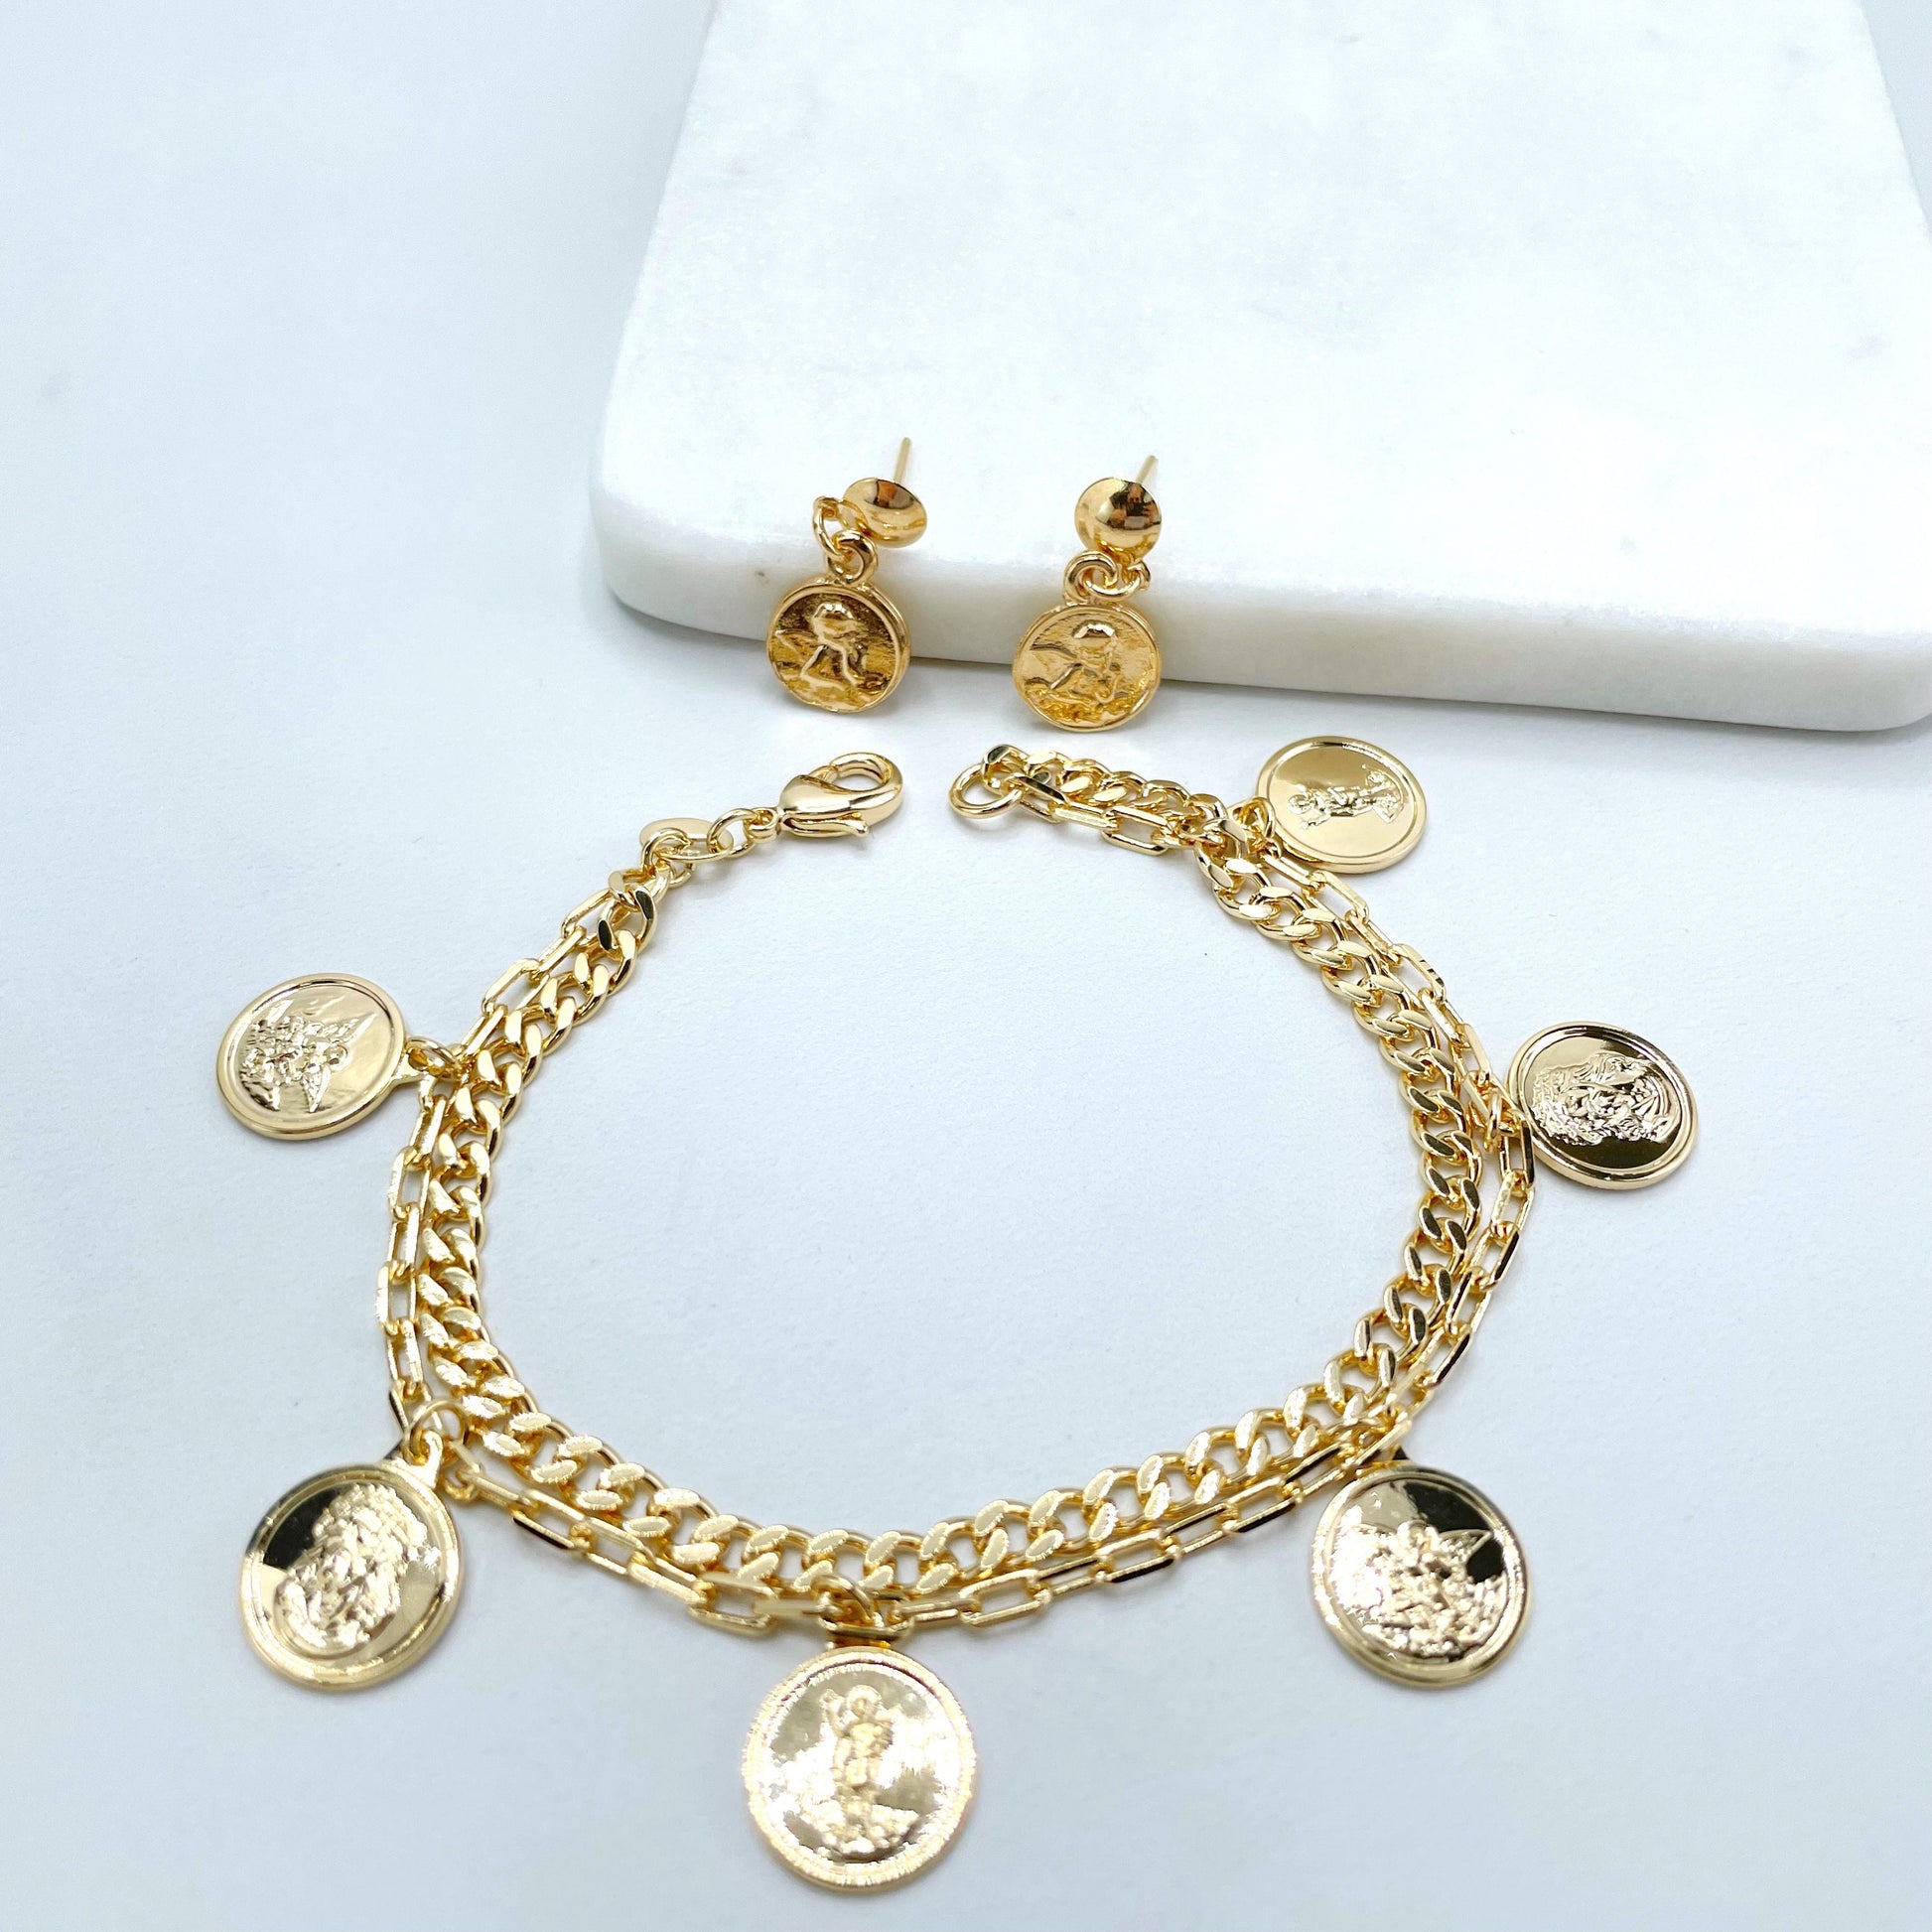 18k Gold Filled Double Curb Link and Paperclip Link, San Miguel, Jesus Christ & St. Expedite Medals Bracelet or Angel Earring Wholesale